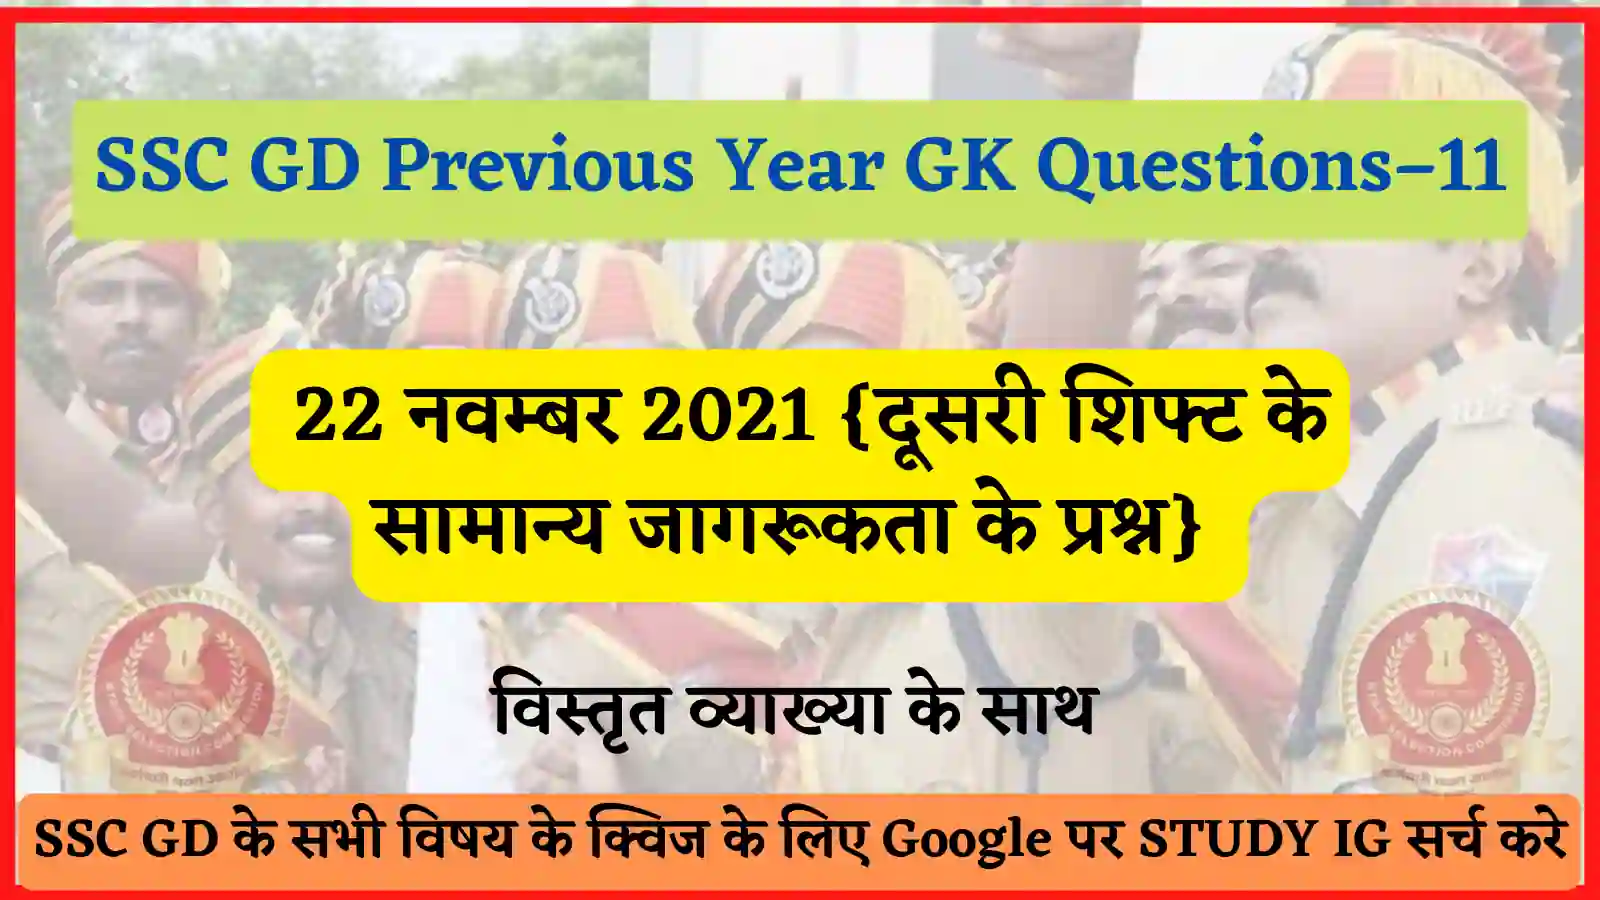  SSC GD Previous Year GK Questions–11 